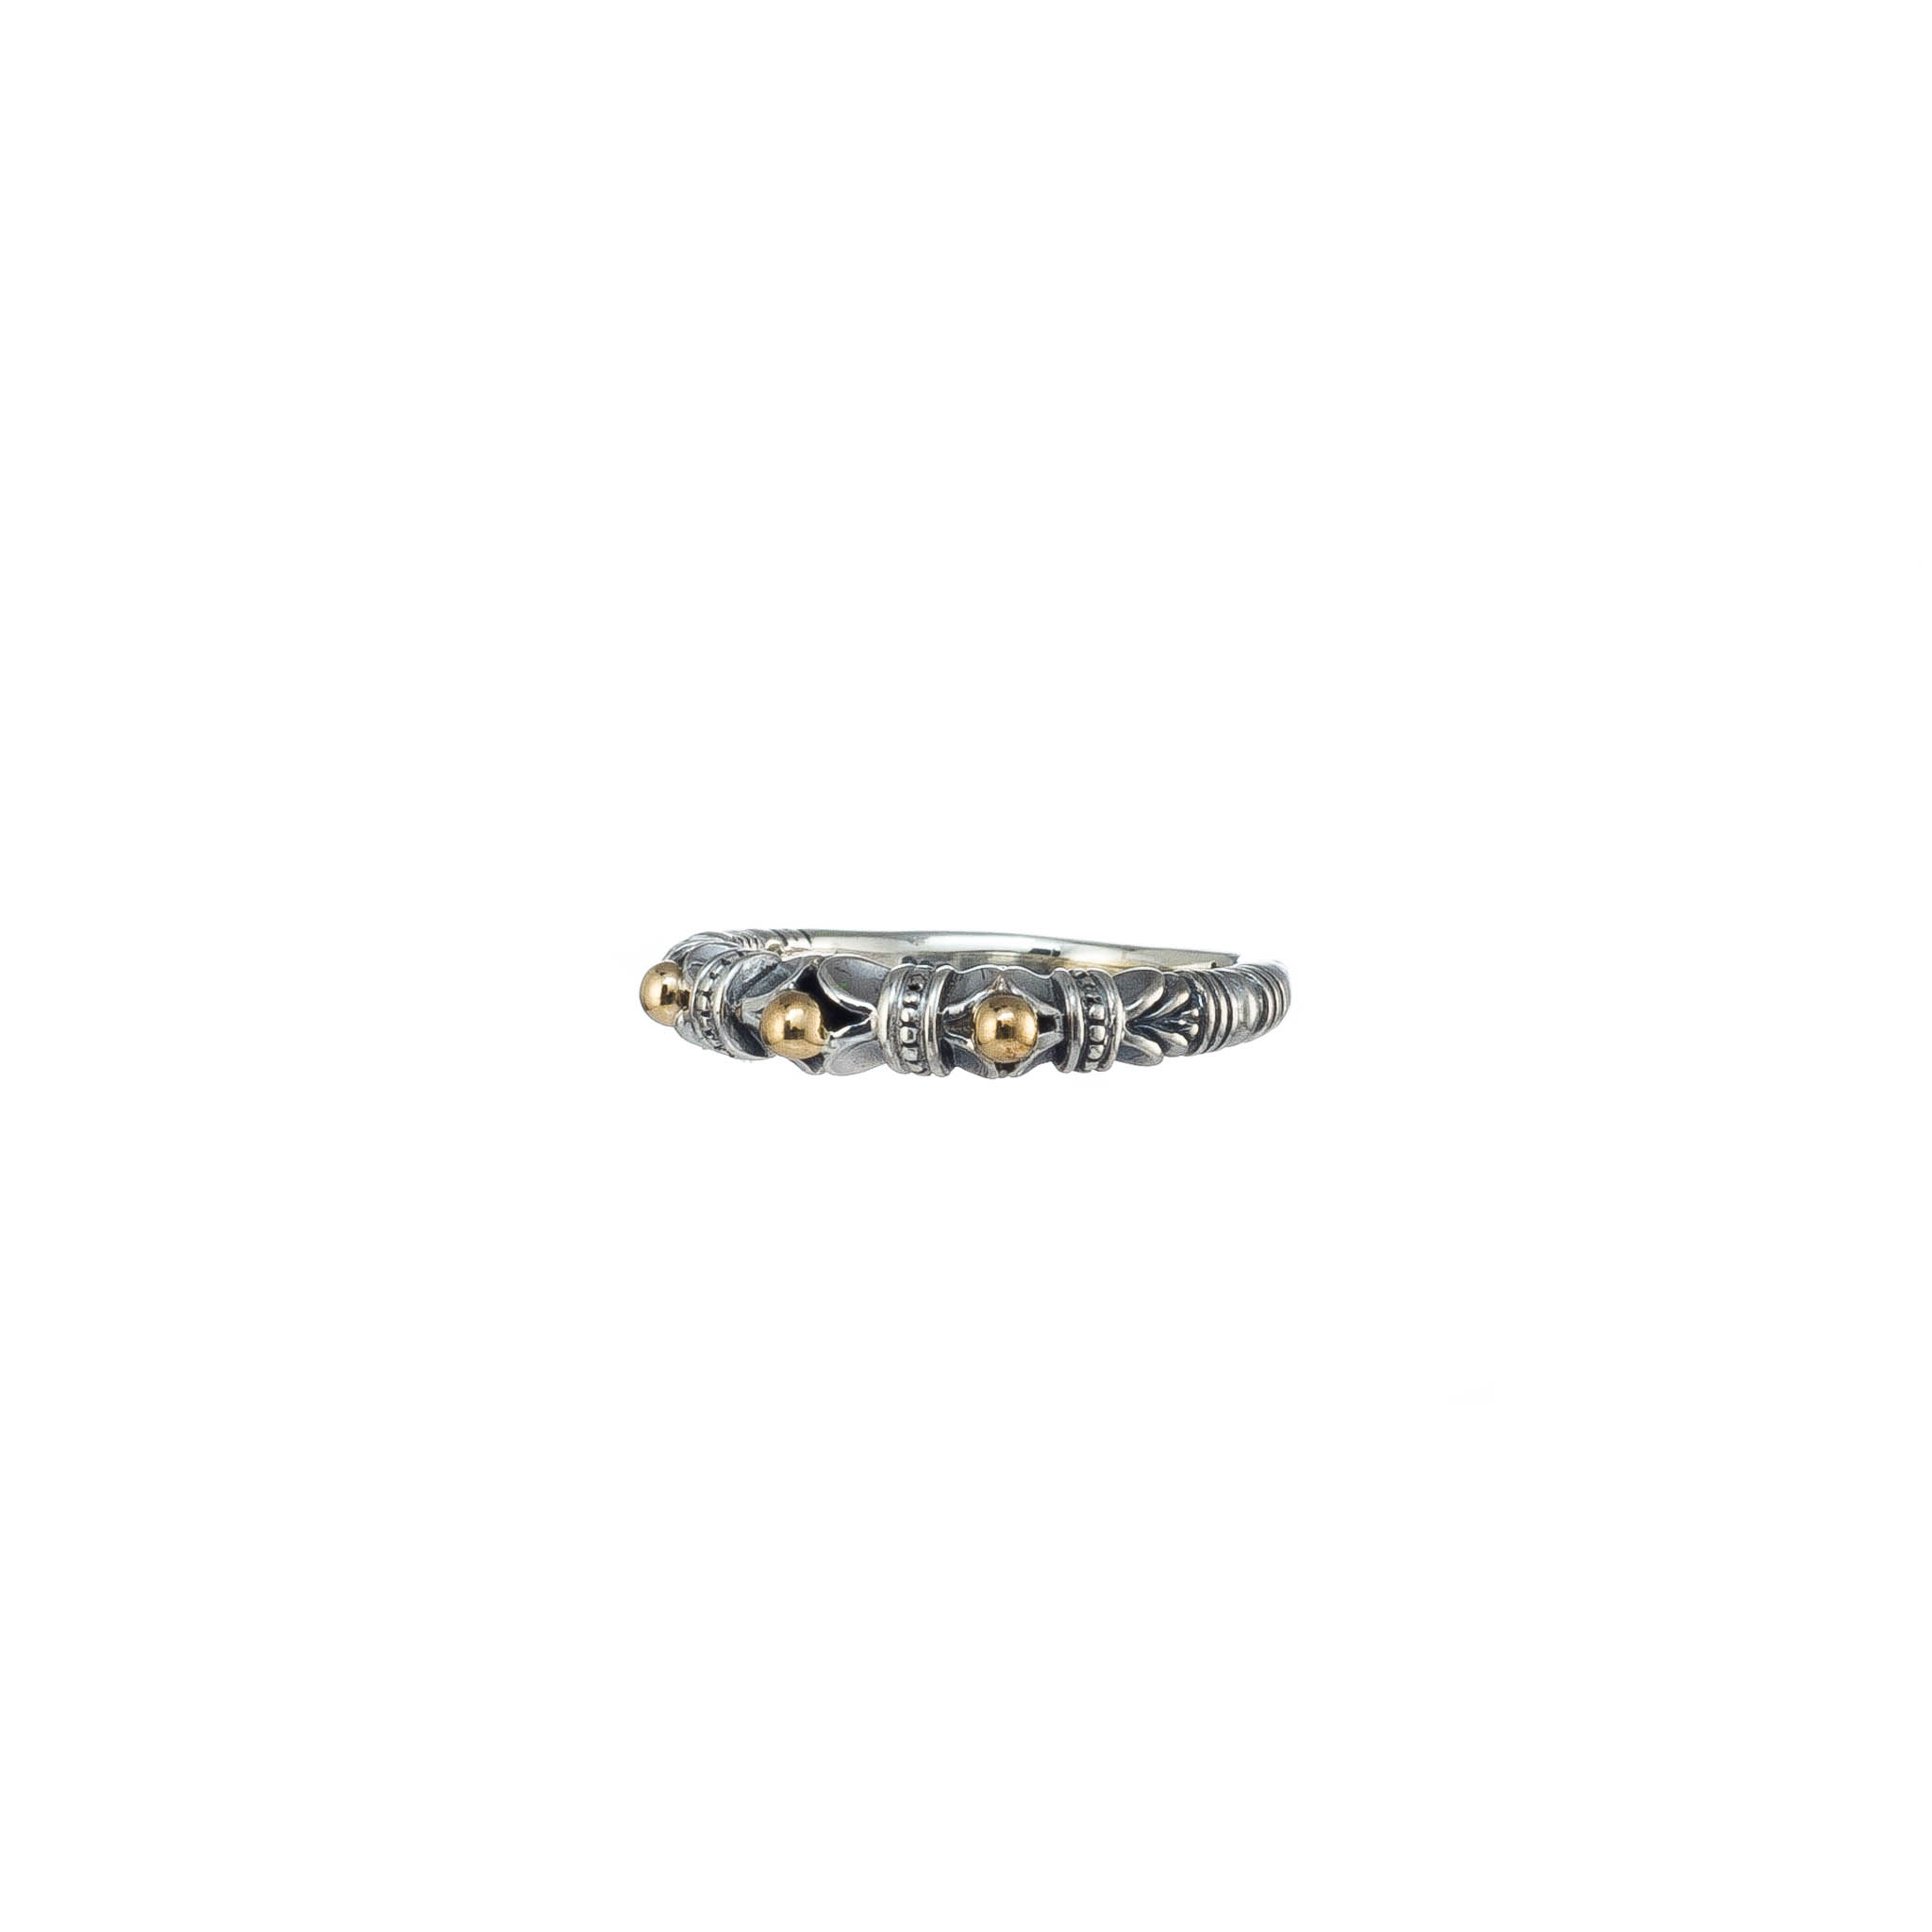 Kassandra Band ring in sterling silver with 18K Gold details